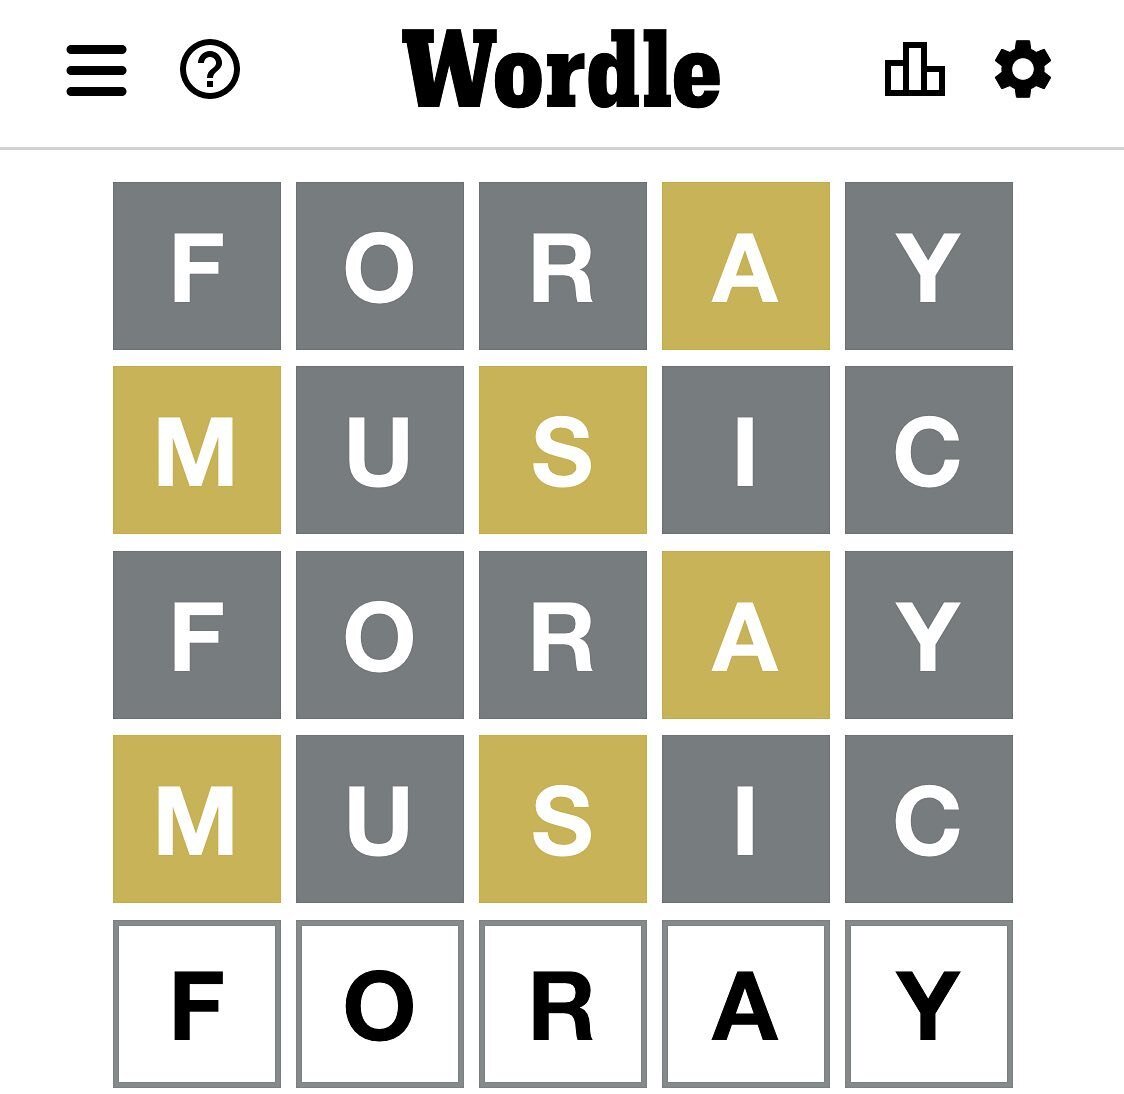 Just a heads up: the wordle today is neither foray or music. You&rsquo;re welcome!